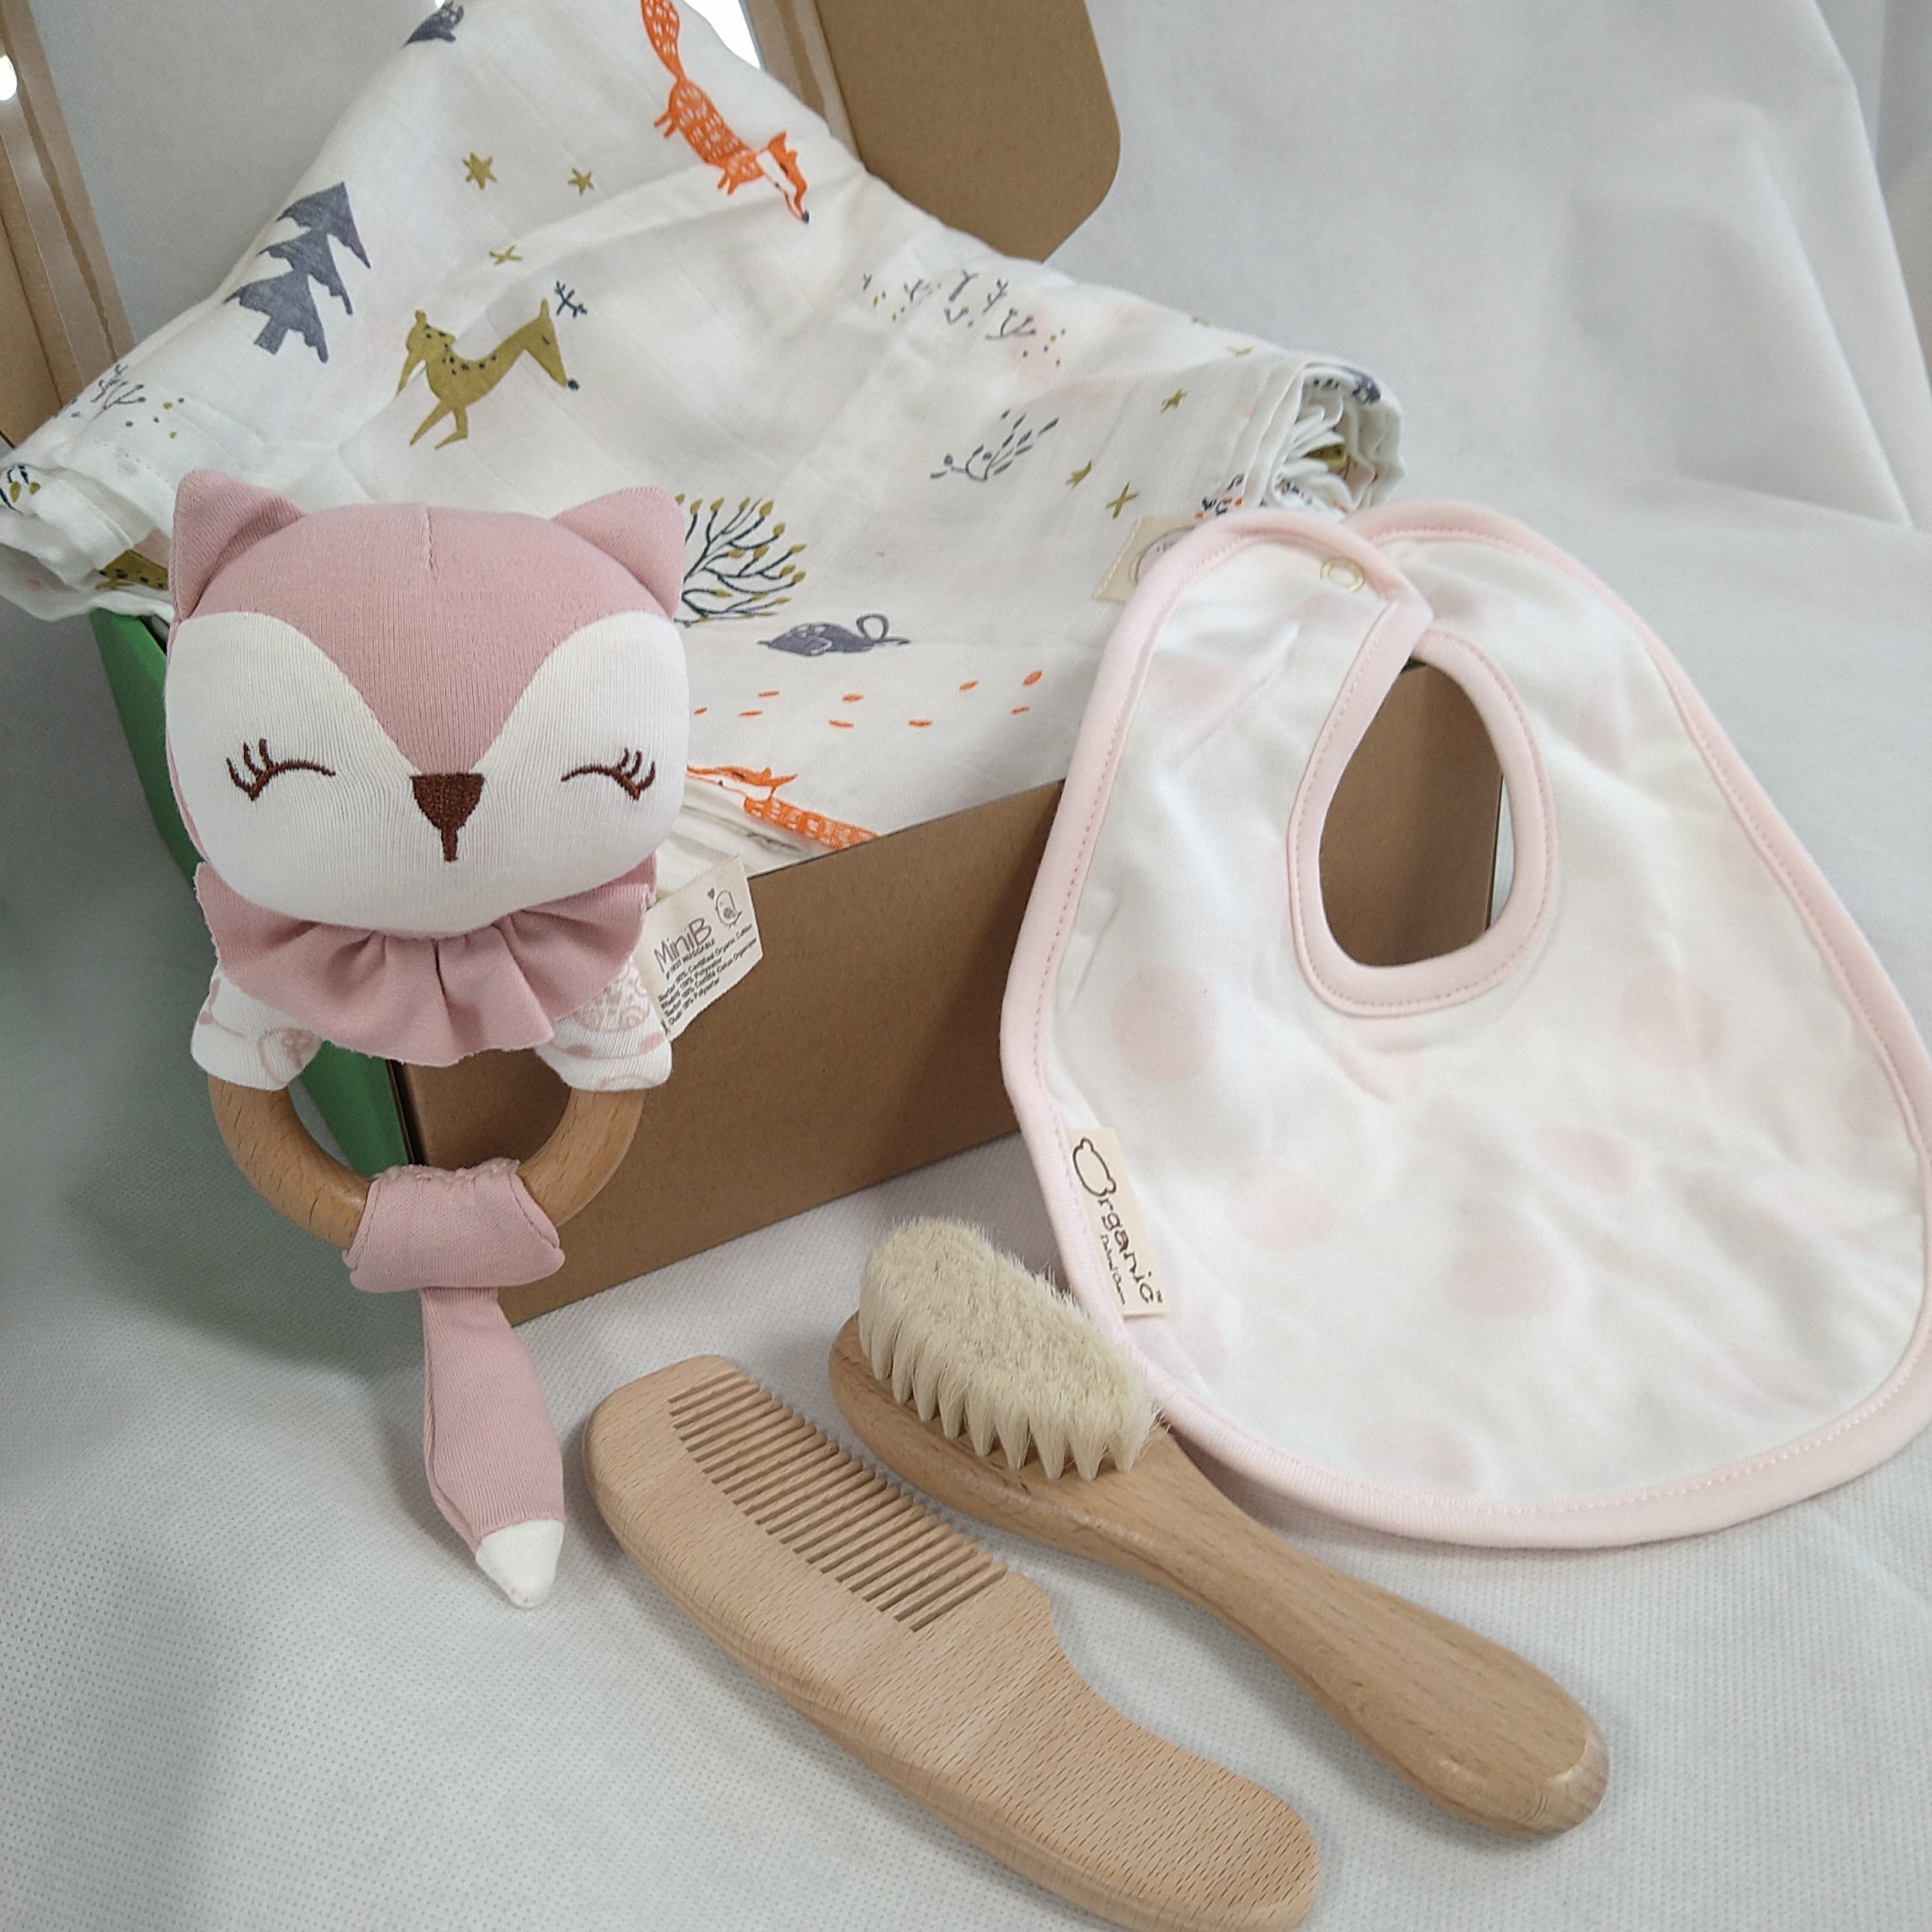 Baby Gift Set - Girl in Pink